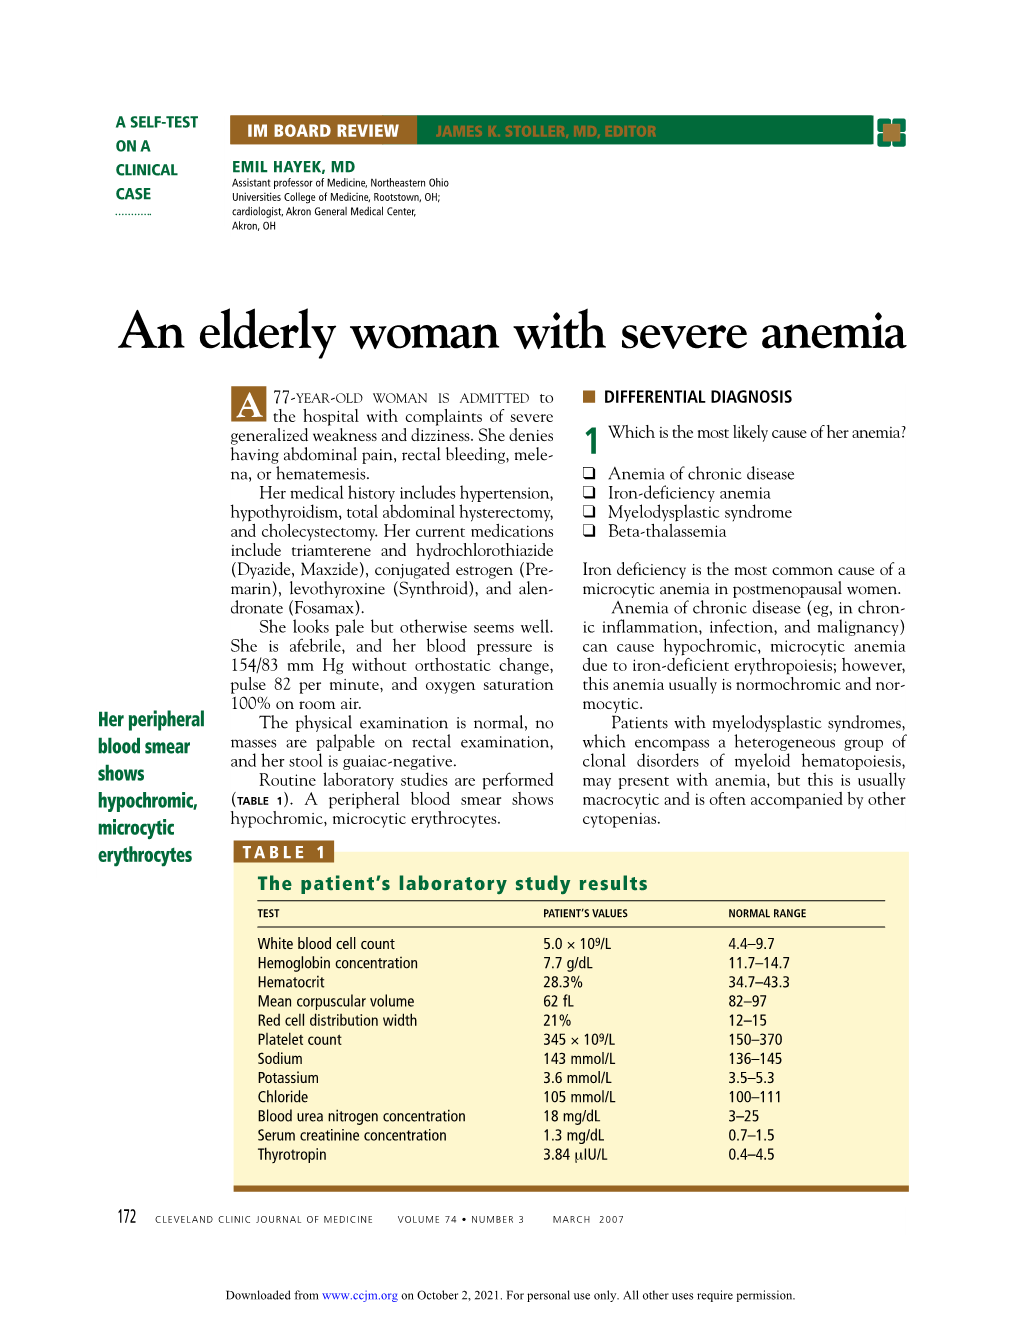 An Elderly Woman with Severe Anemia